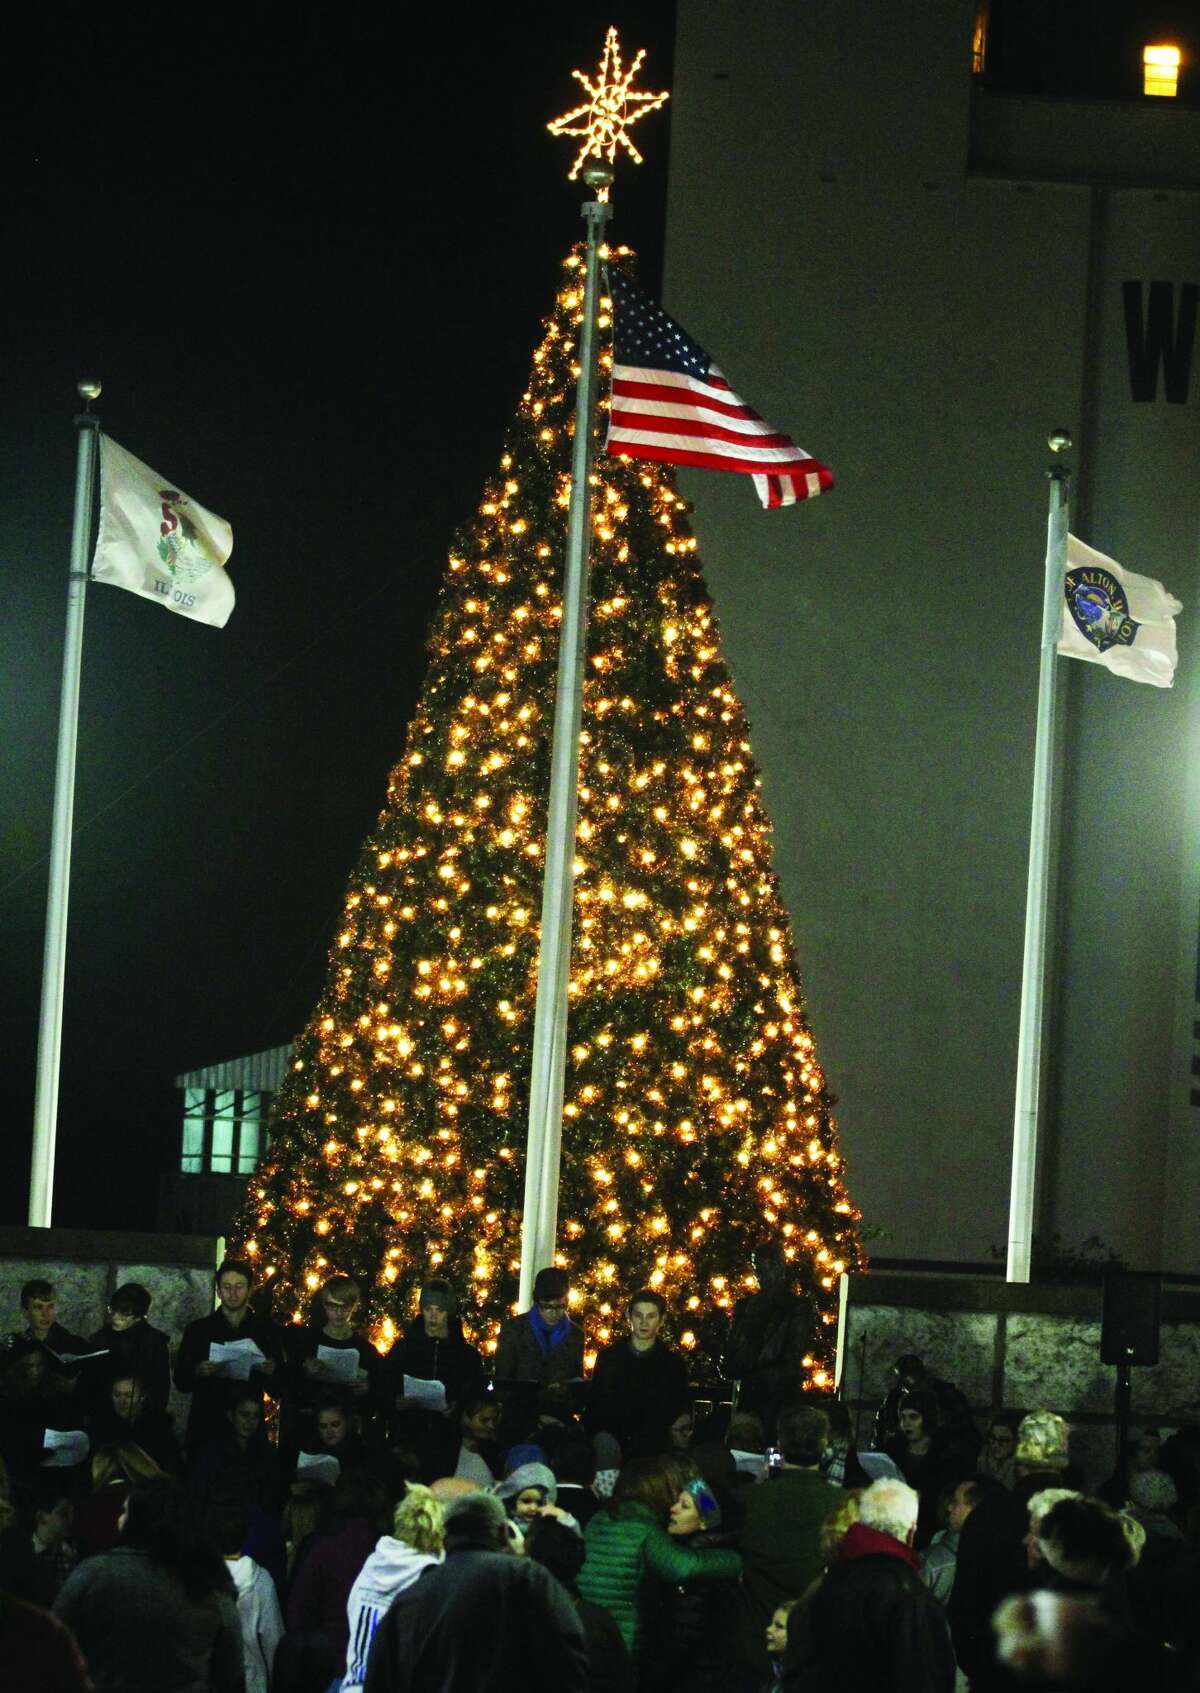 The 27th Annual Tree Lighting is planned for 6 p.m. Friday at Lincoln-Douglas Square in Alton.  